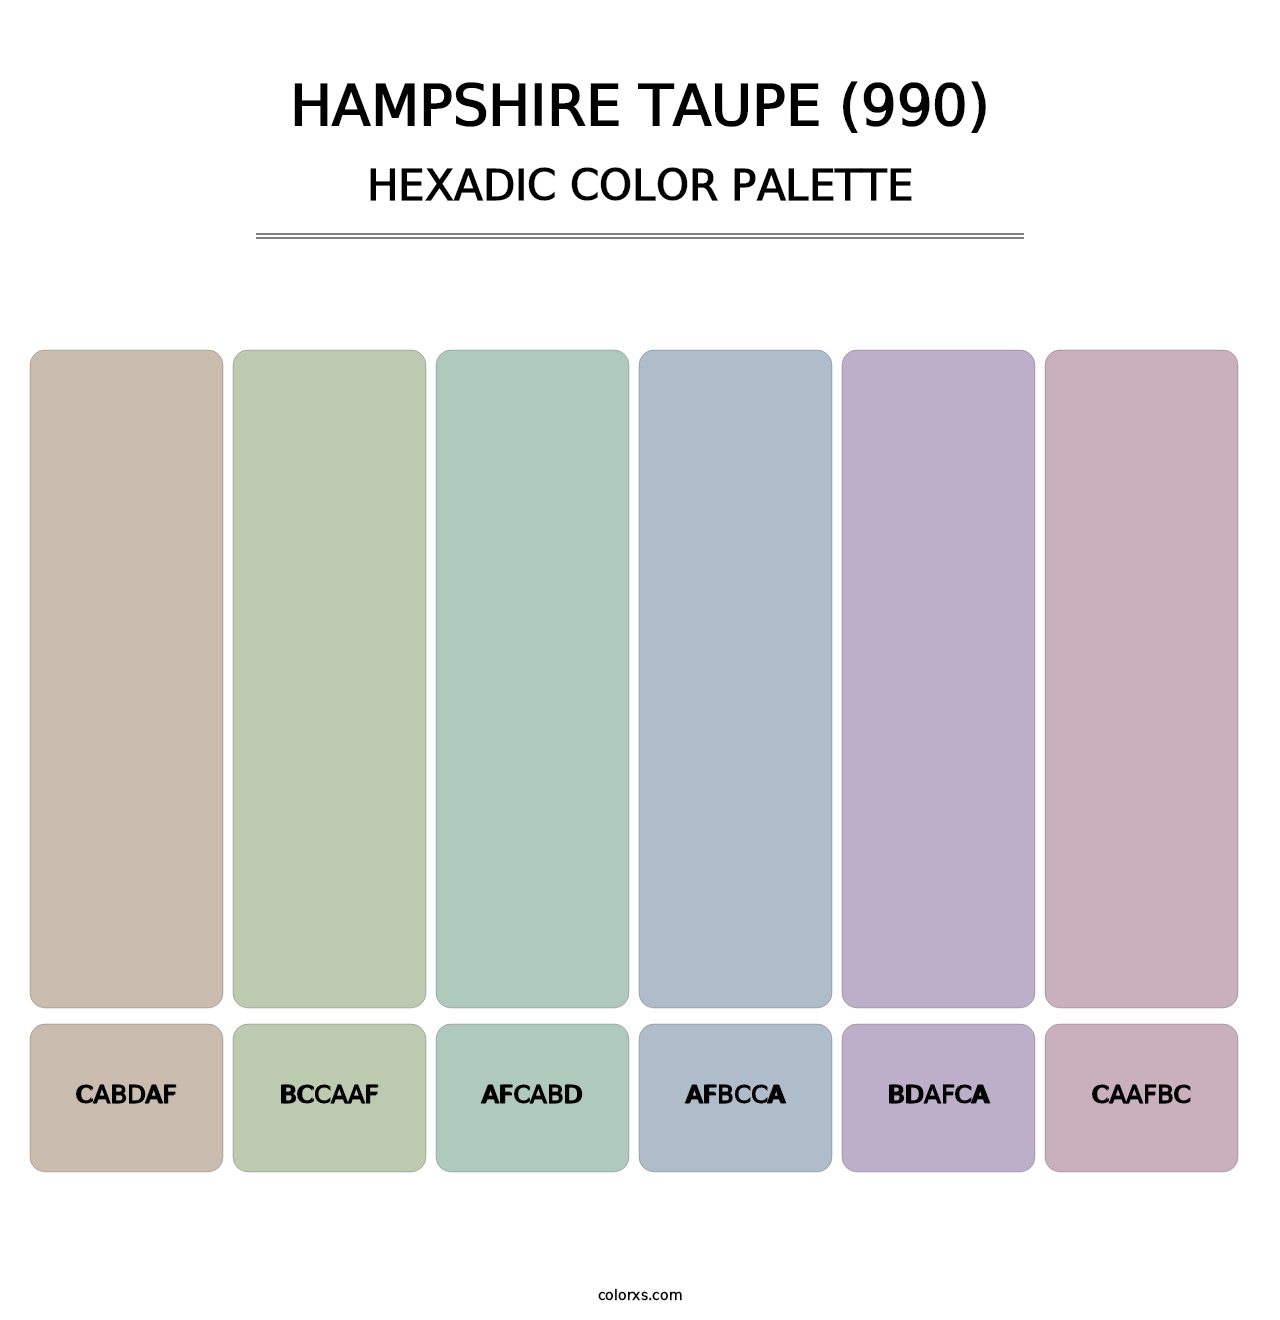 Hampshire Taupe (990) - Hexadic Color Palette